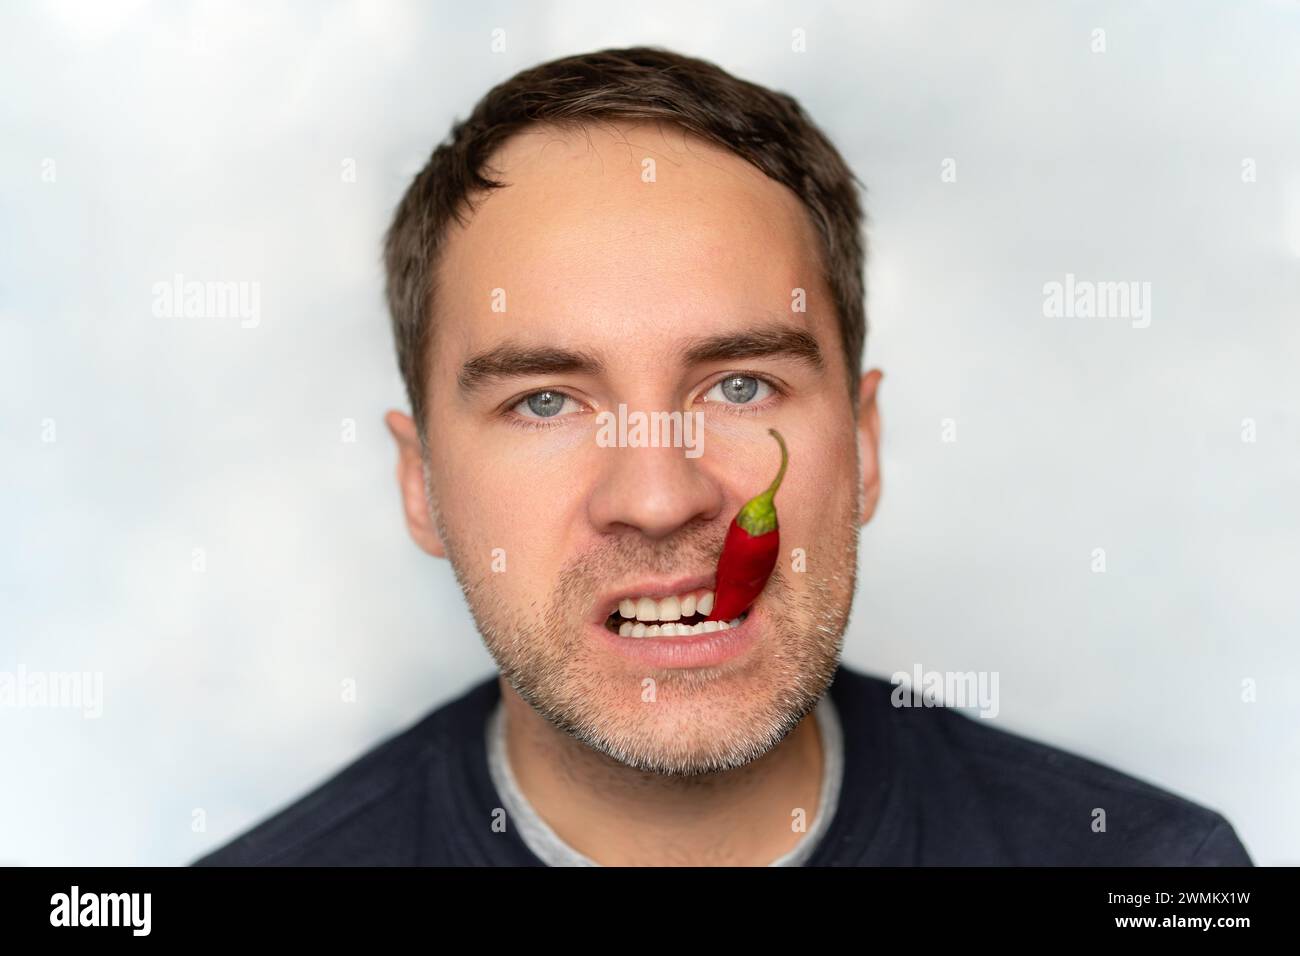 Portrait of young man eating chili pepper. red hot pepper in the mouth close-up Stock Photo